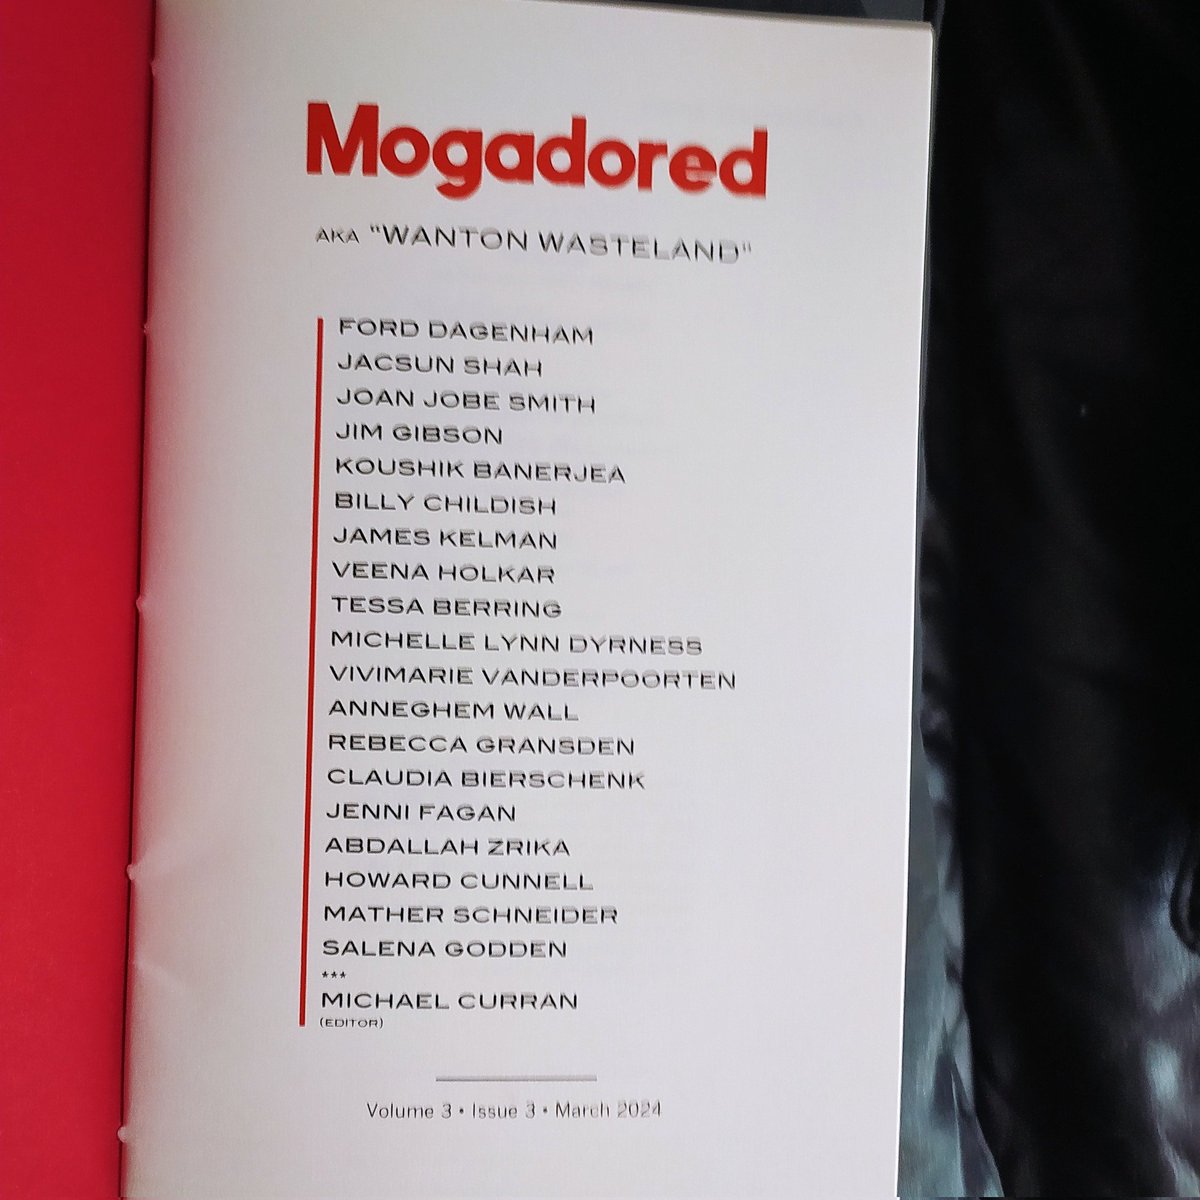 Fantastic looking new chapbook from @TangerinePress has arrived. Mogadored. And what a stellar line up! Looking forward to diving into this. There's only 100 numbered copies so you'd better be quick (I think they still have a few left)